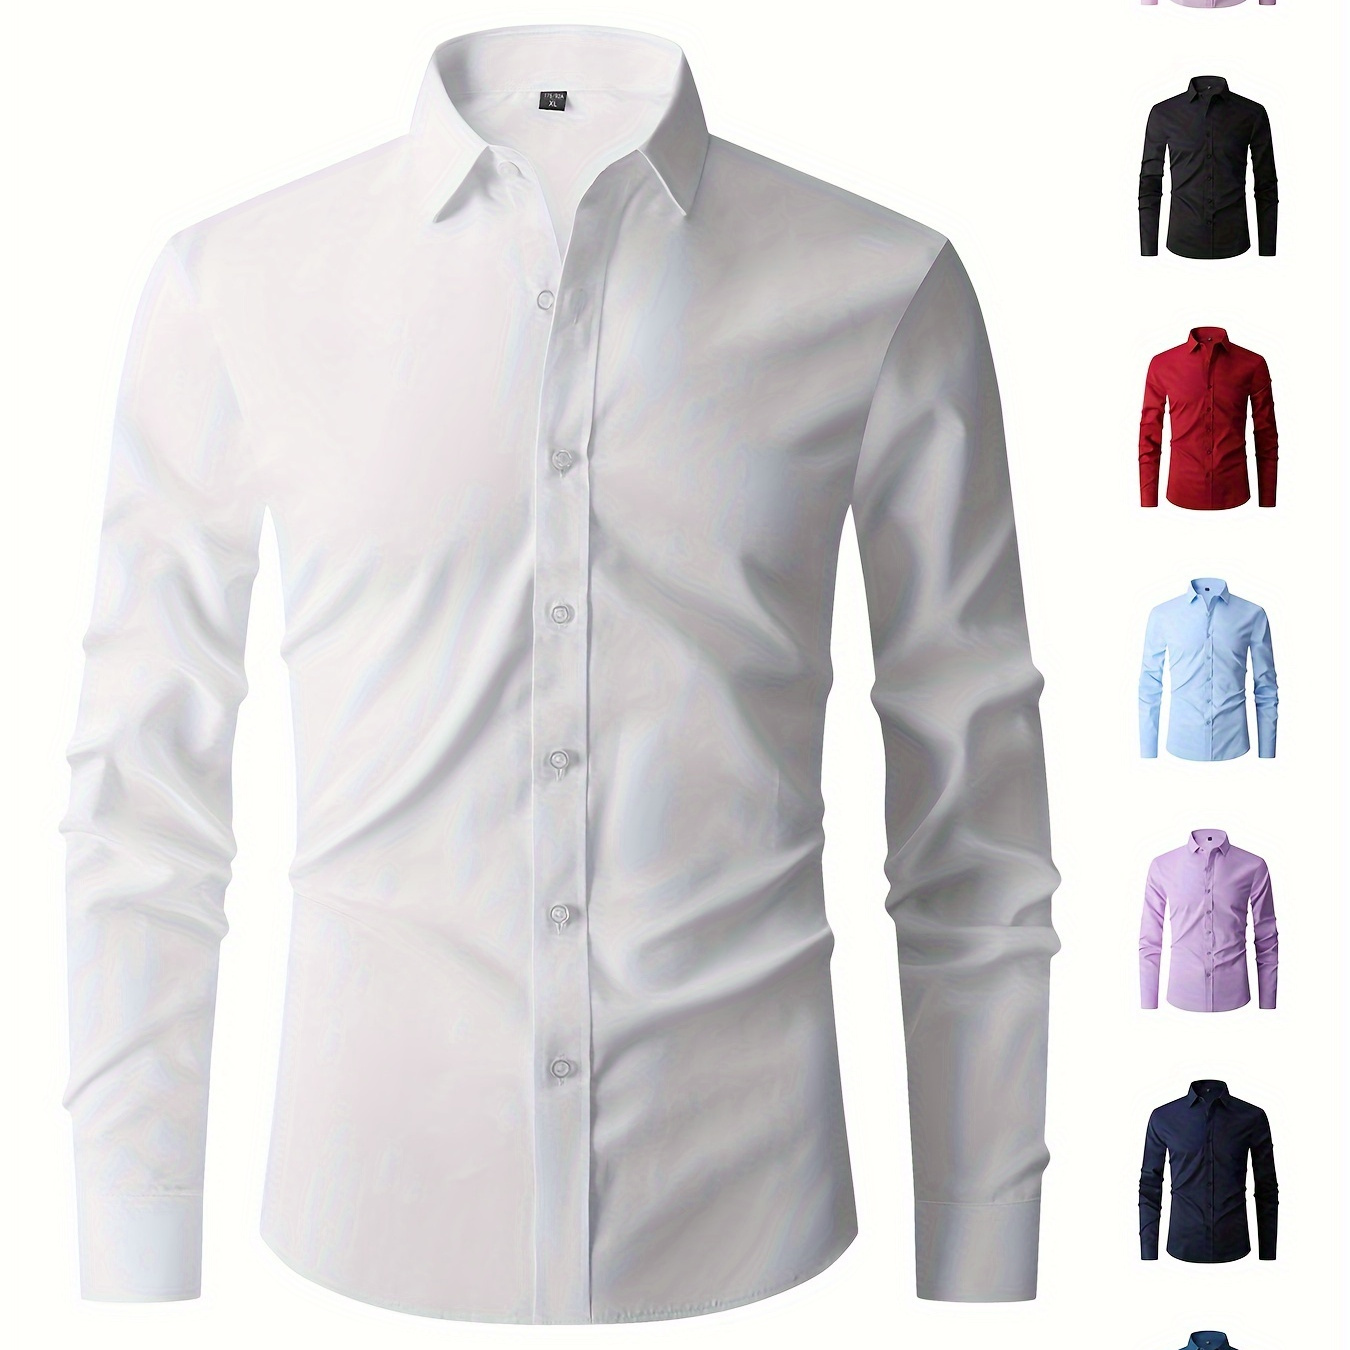 

Classic Design Men's Solid Formal Long Sleeve Shirt, Men's Button Up Shirt For Business Formal Occasions, Gift For Men